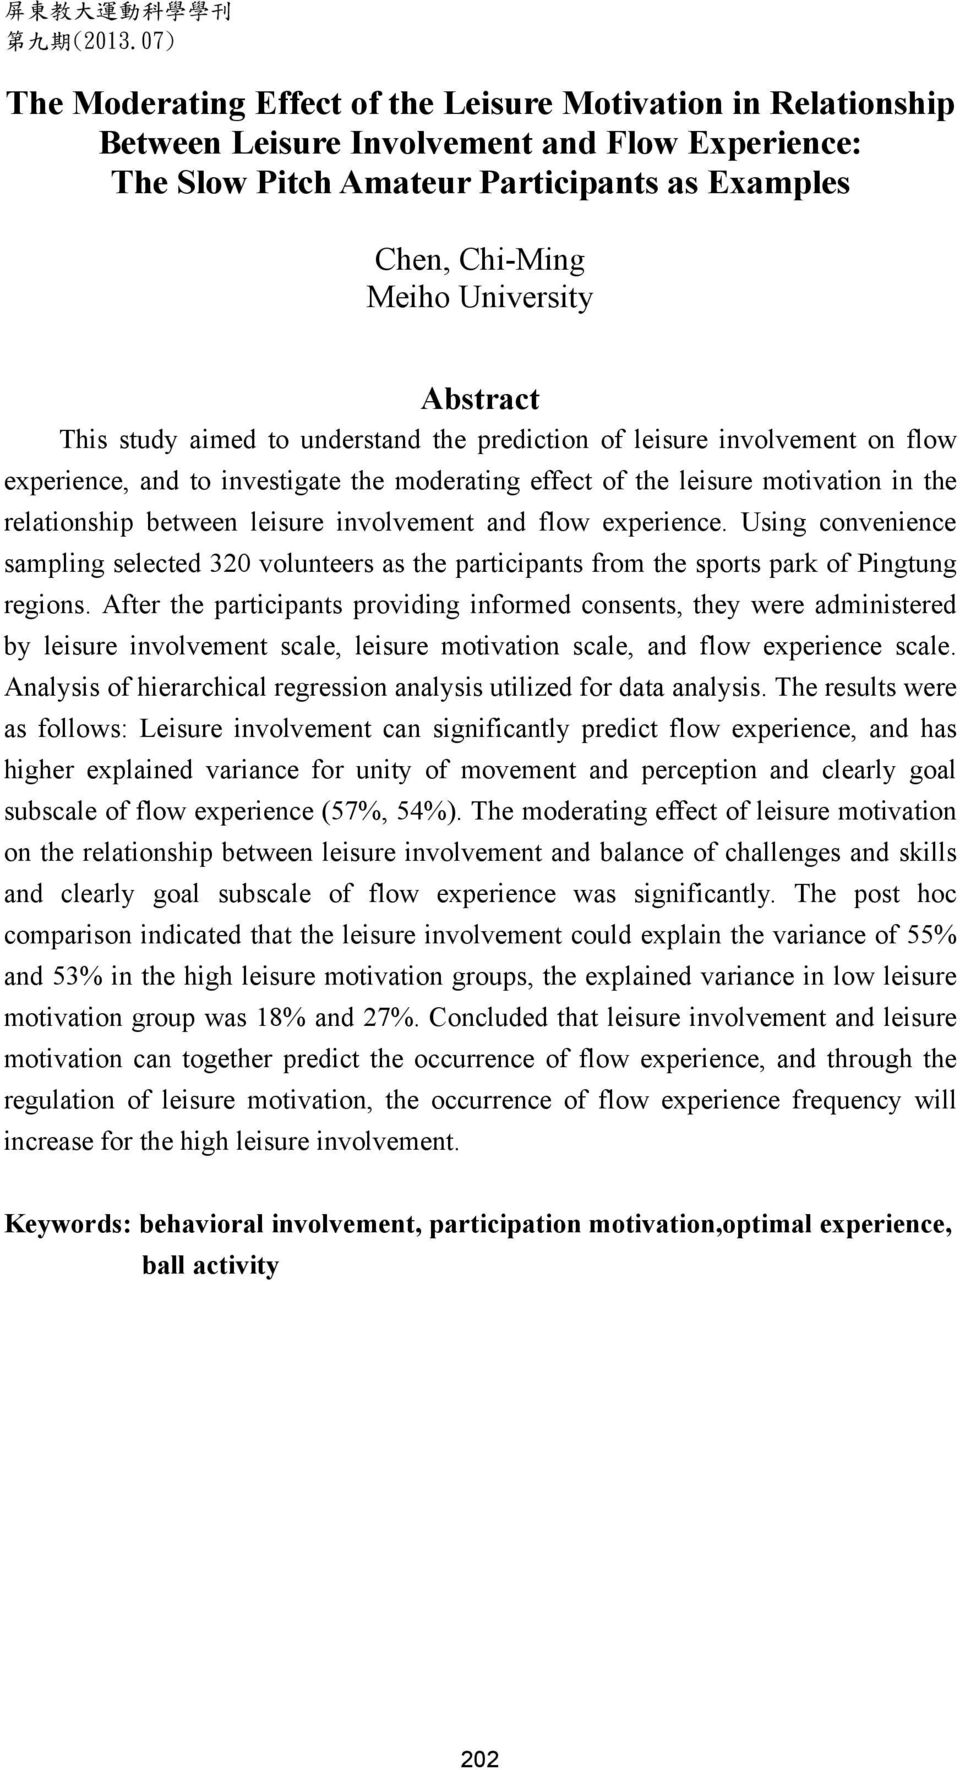 Abstract This study aimed to understand the prediction of leisure involvement on flow experience, and to investigate the moderating effect of the leisure motivation in the relationship between